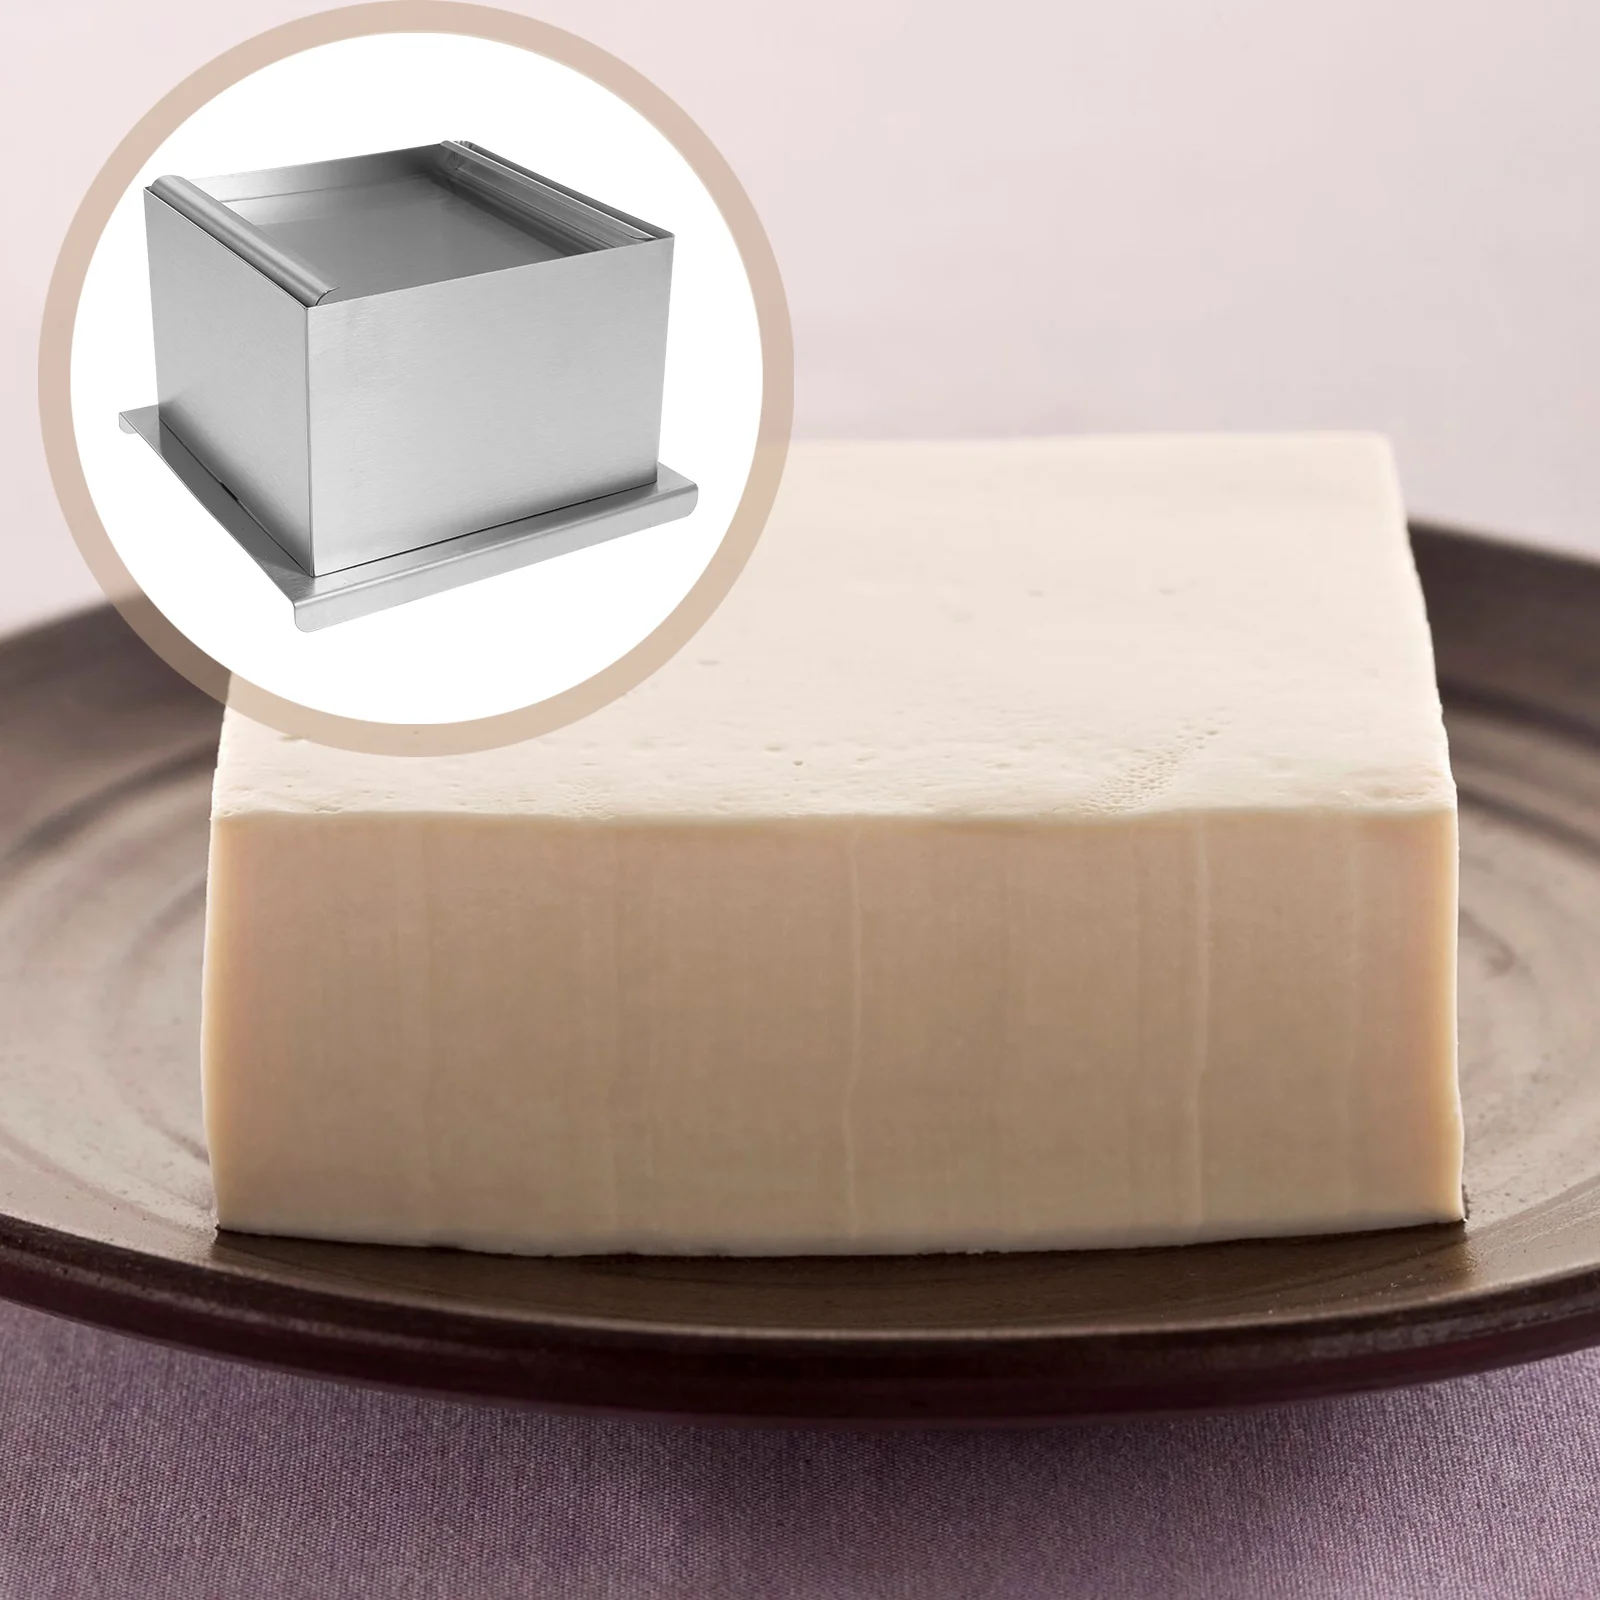 

Tofu Mold Plastic Storage Case Creative Bean Curd Making Tool Stainless Steel Container Presser 304 Convenient